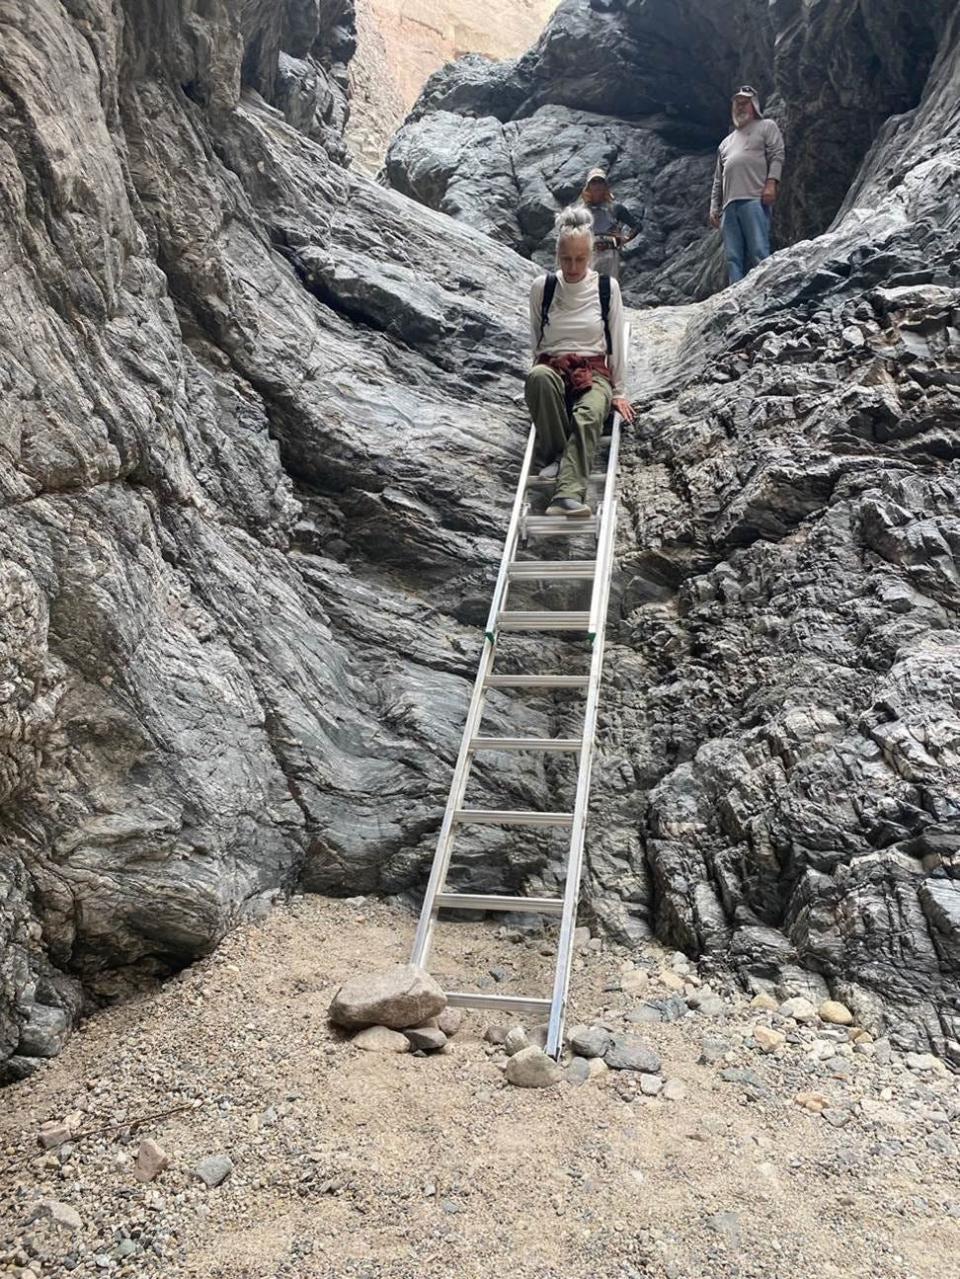 Members of the Coachella Valley Hiking Club inspect a ladder in Ladders Canyon.